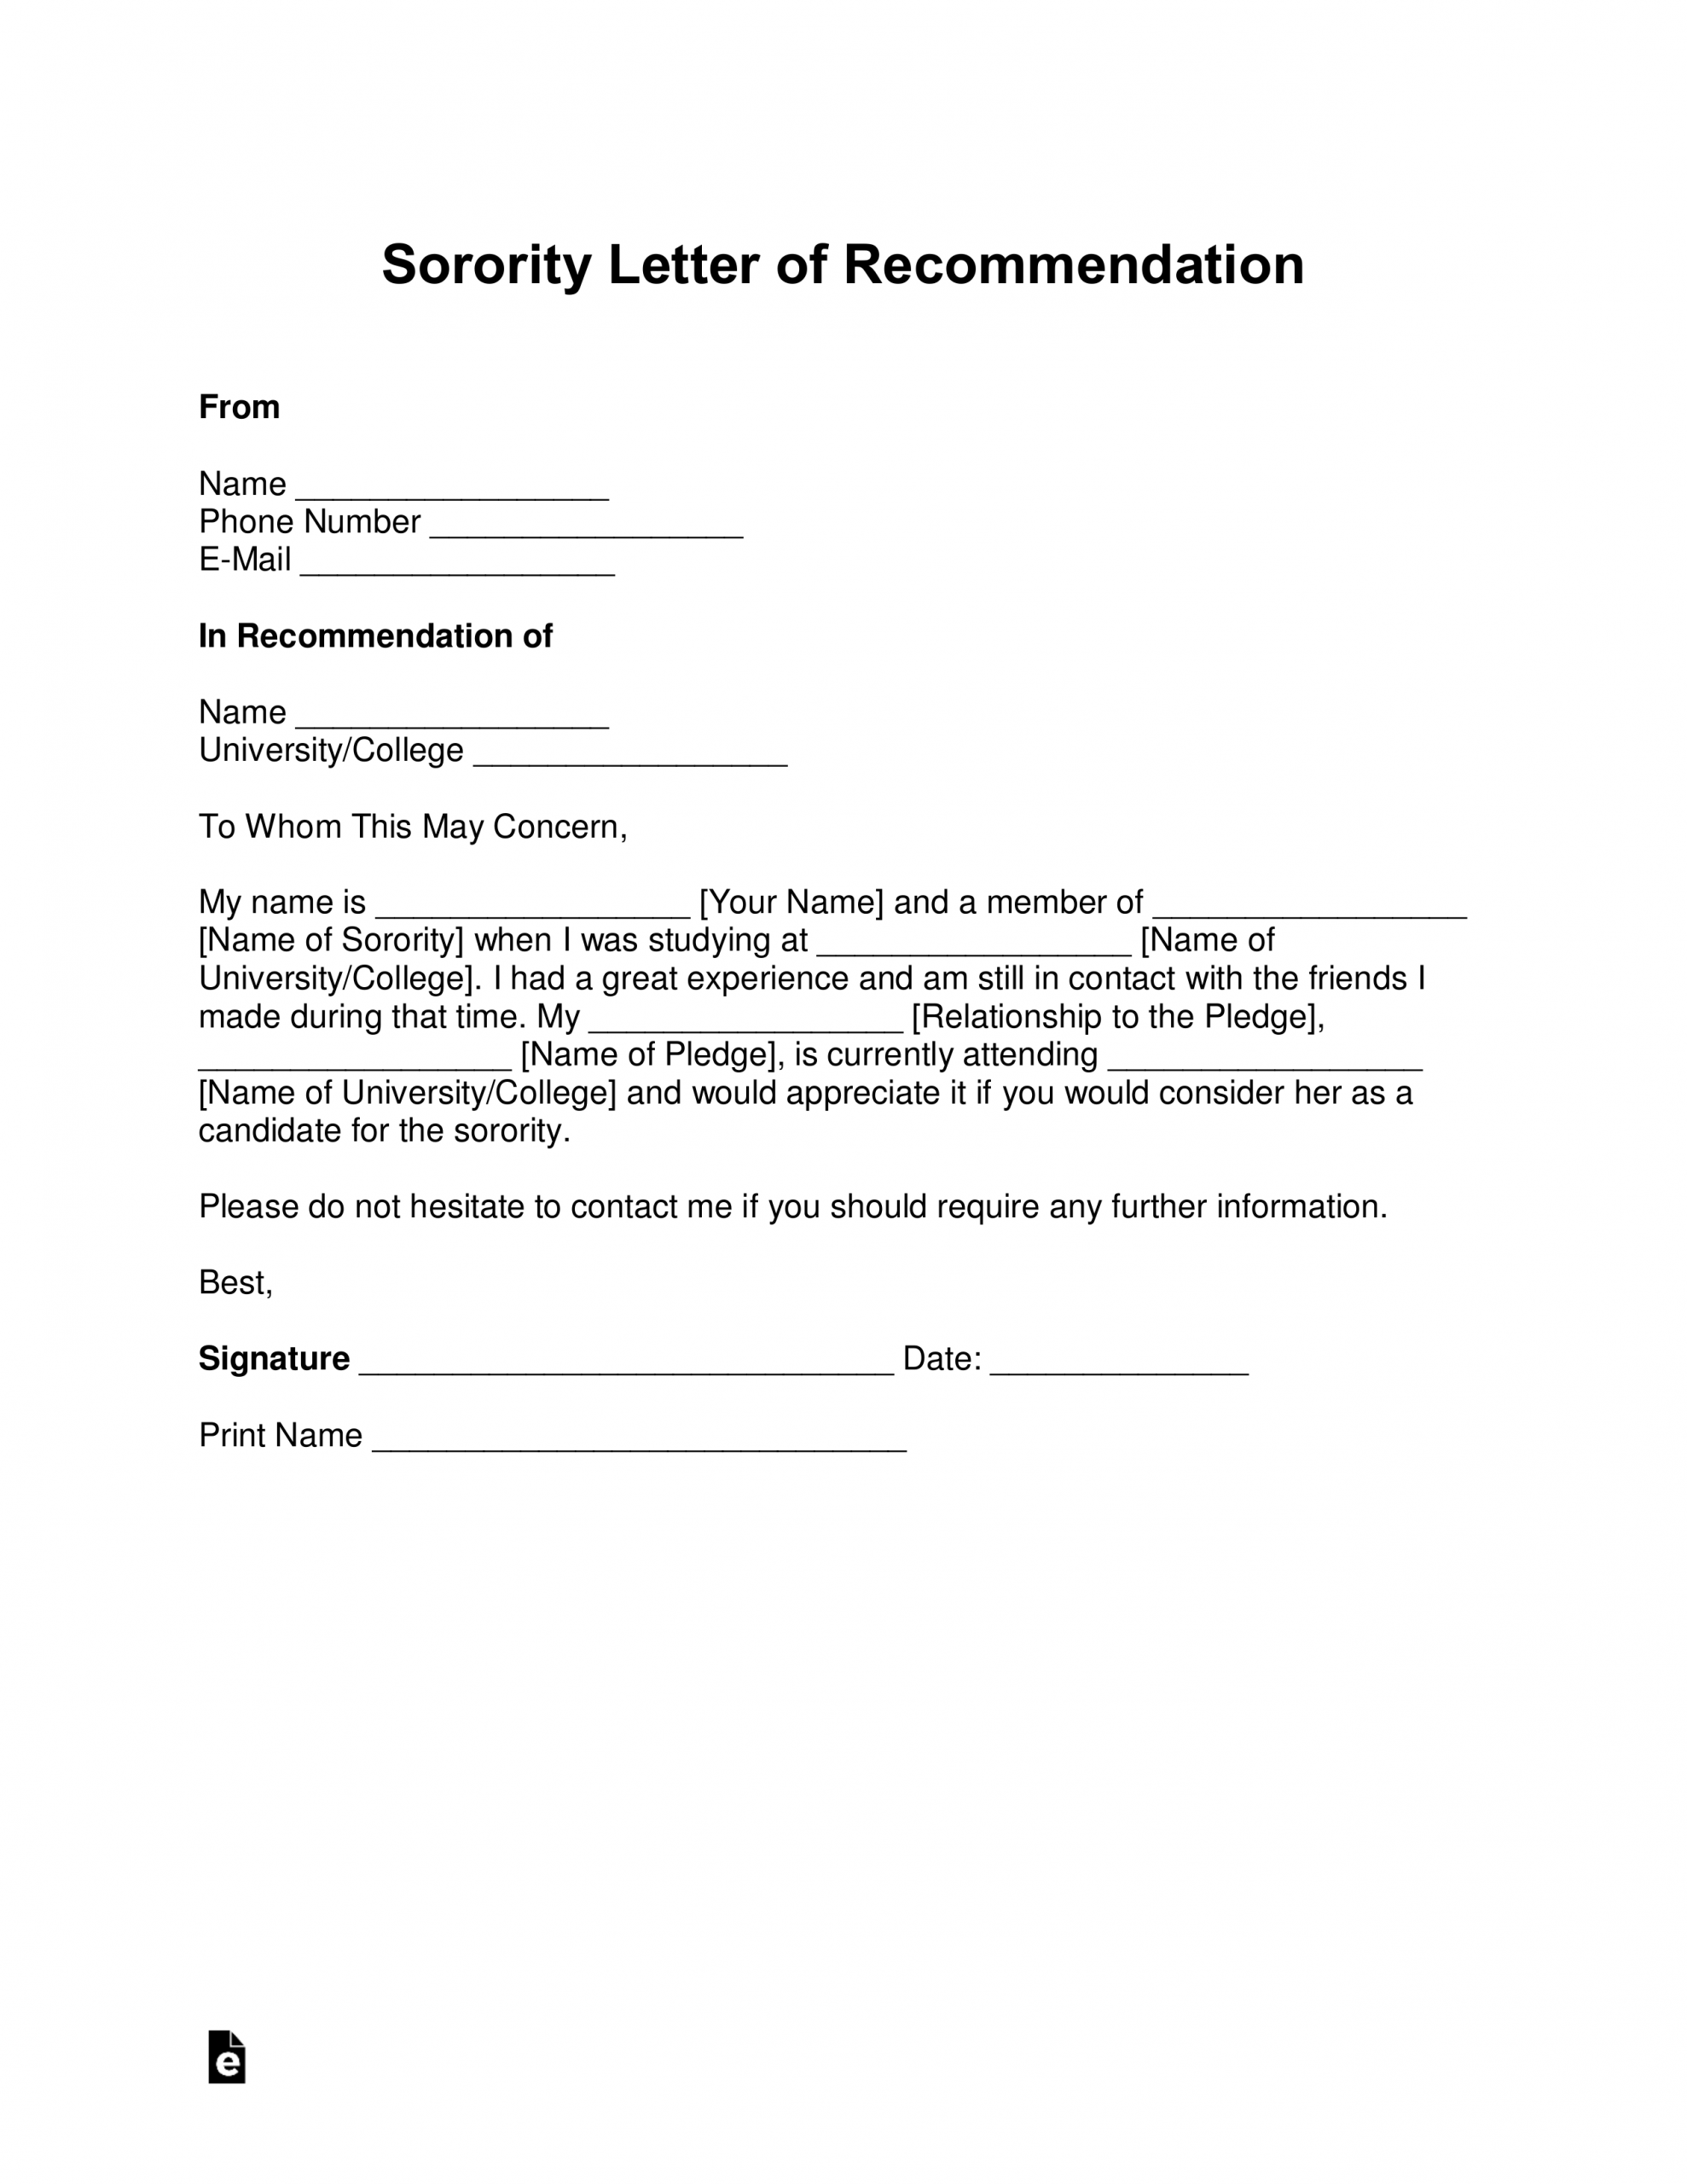 Free Sorority Recommendation Letter Template With Samples inside proportions 2550 X 3301